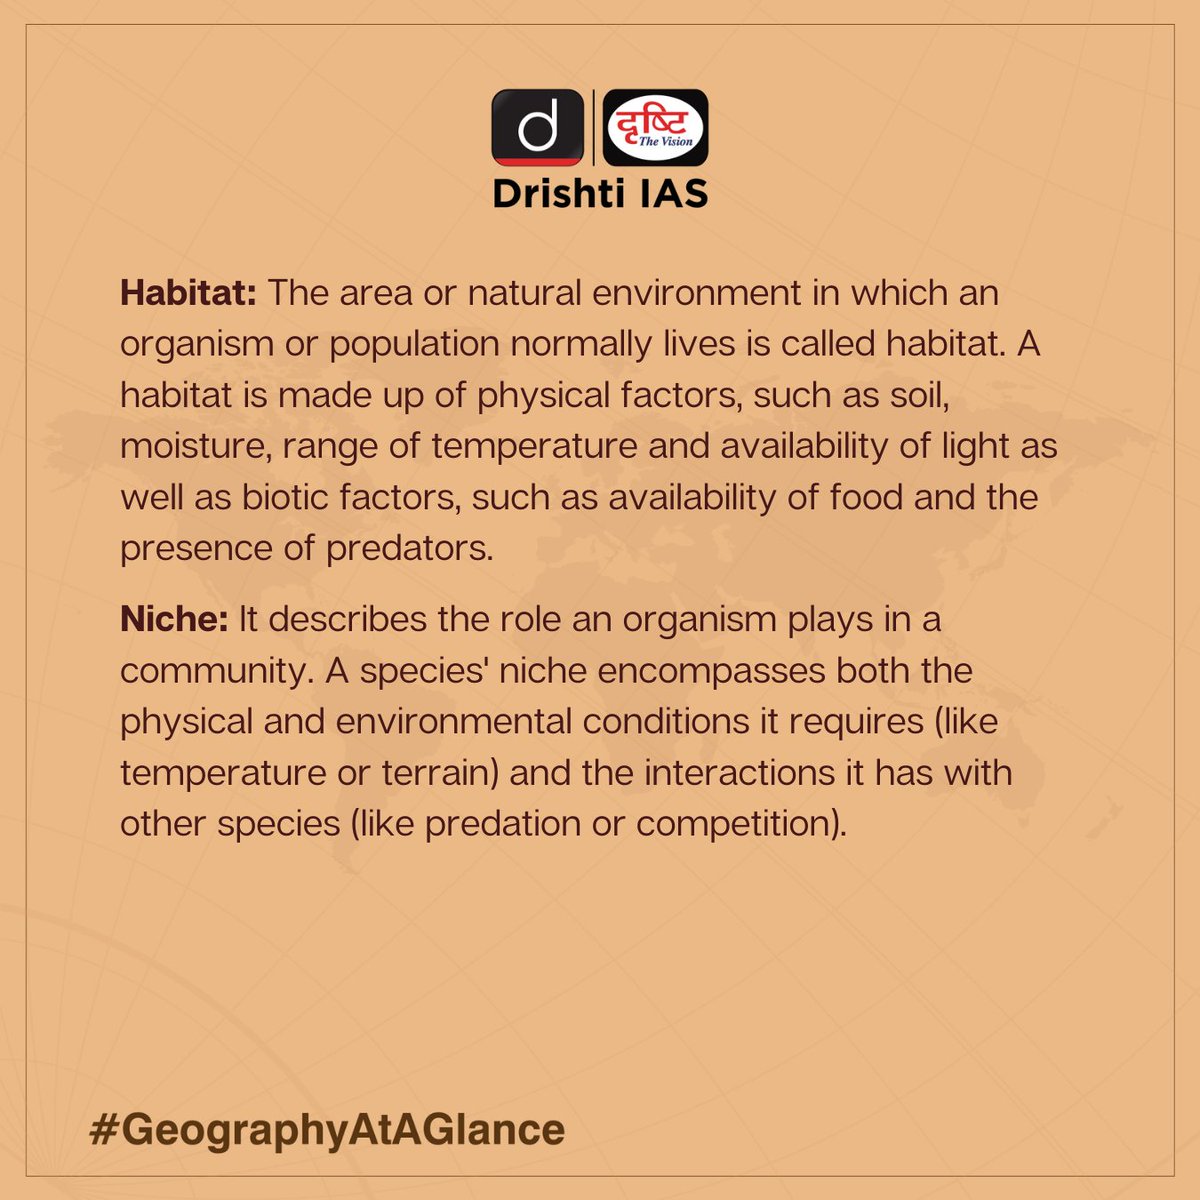 #GeographyAtAGlance is all about exploring the earth and the human societies spread across it. Learn to look beyond horizons with this engaging subject! 
 
#DrishtiGuideToGS #Geography #Ecology #Earth #UPSC #IAS #UPSCPrelims #Prelims2023 #UPSC2023 #DrishtiIAS #DrishtiIASEnglish